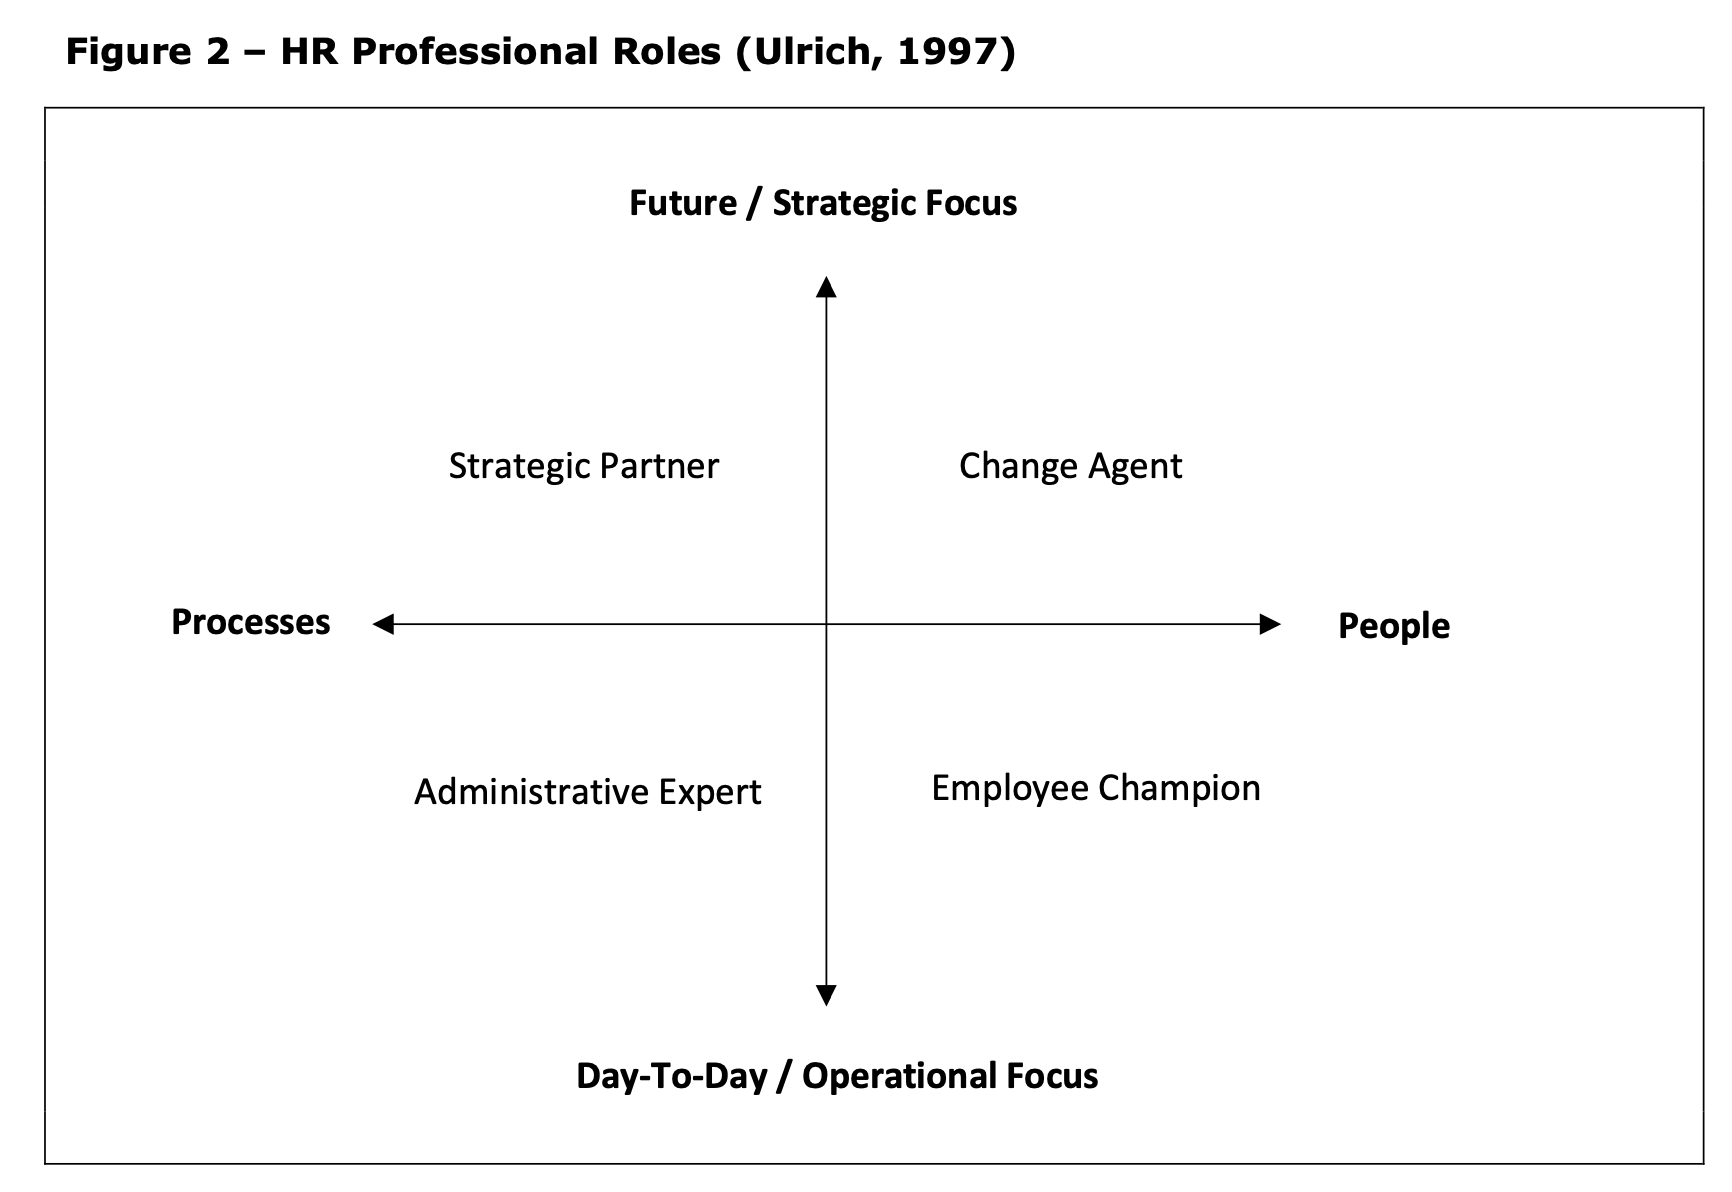 Ulrich's 1997 model of HR professional roles, showing 4 roles of strategic partner, change agent, administrative expert and employee champion.